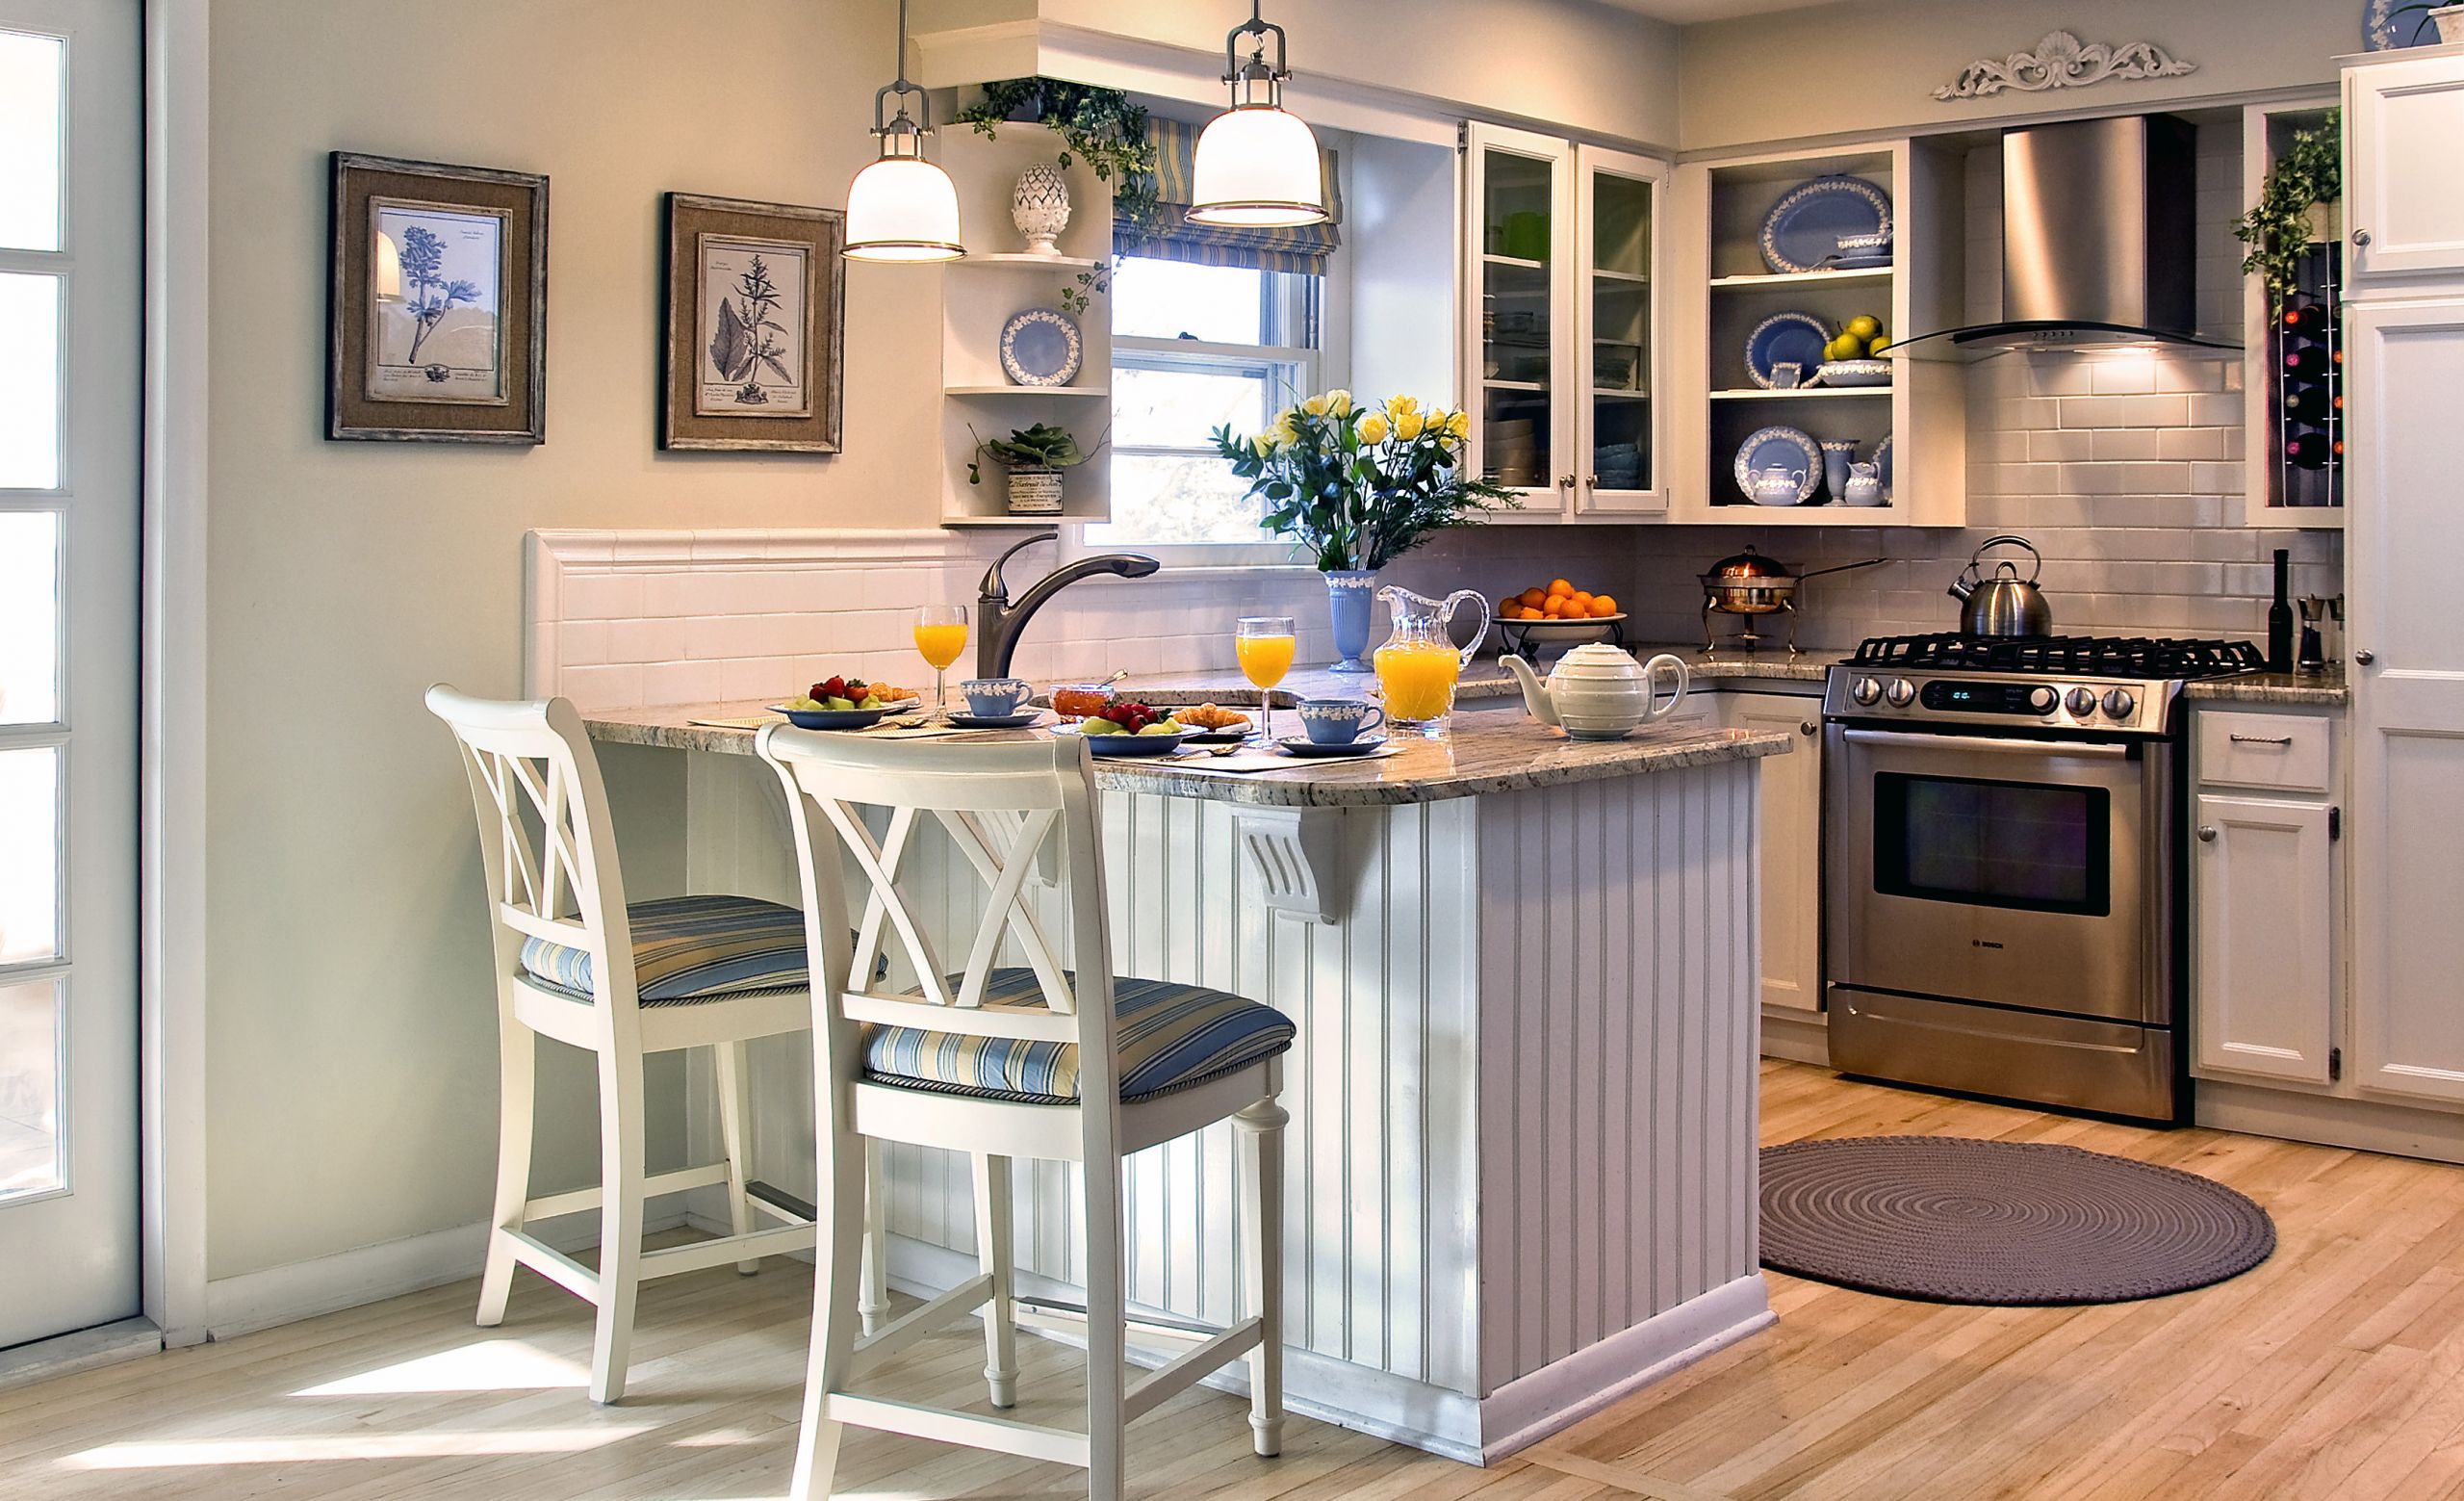 Maximize Space In Small Kitchen
 6 ways to maximize the space in a small kitchen